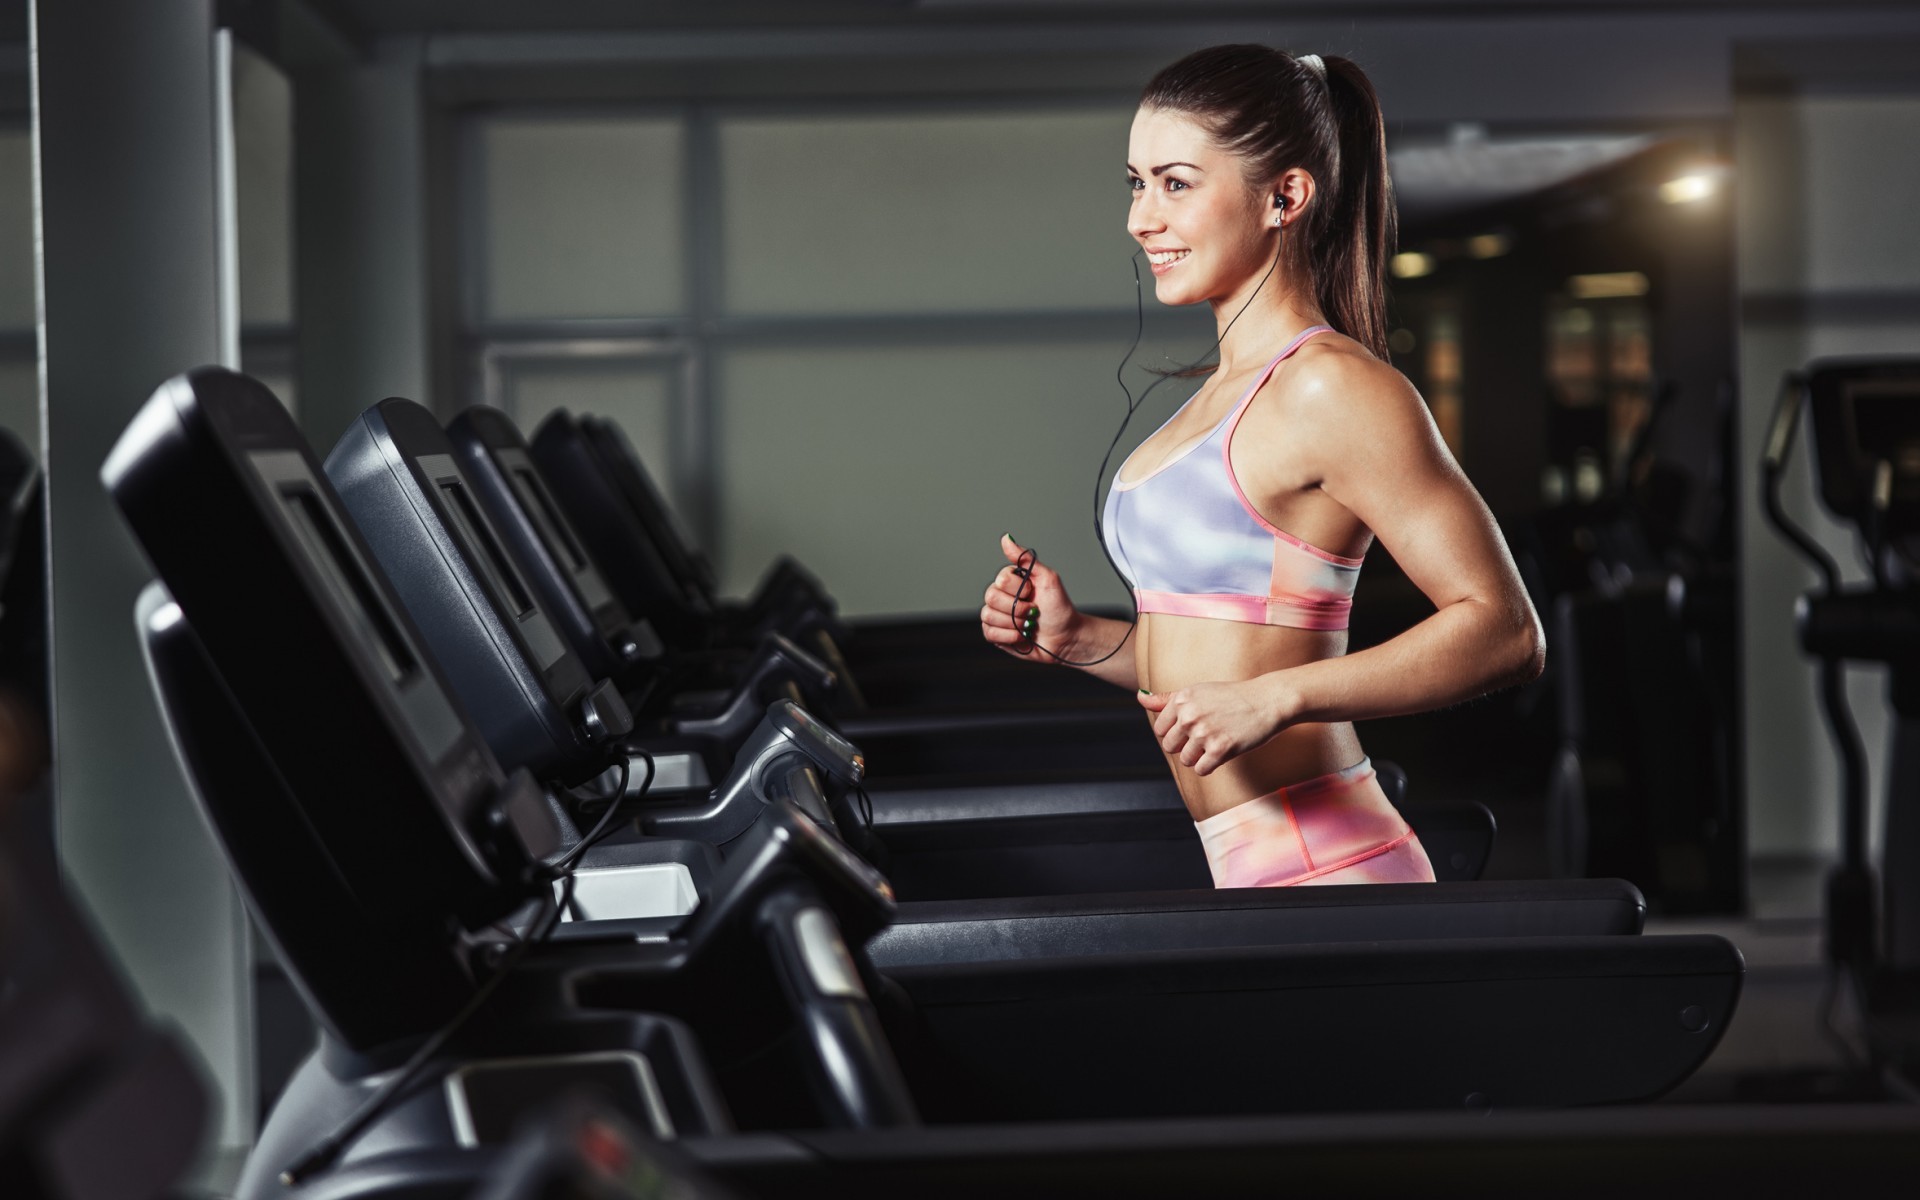 People 1920x1200 women model brunette long hair sports bra gyms gym clothes running smiling skinny treadmills ponytail women indoors indoors sport working out exercise bra earphones looking into the distance